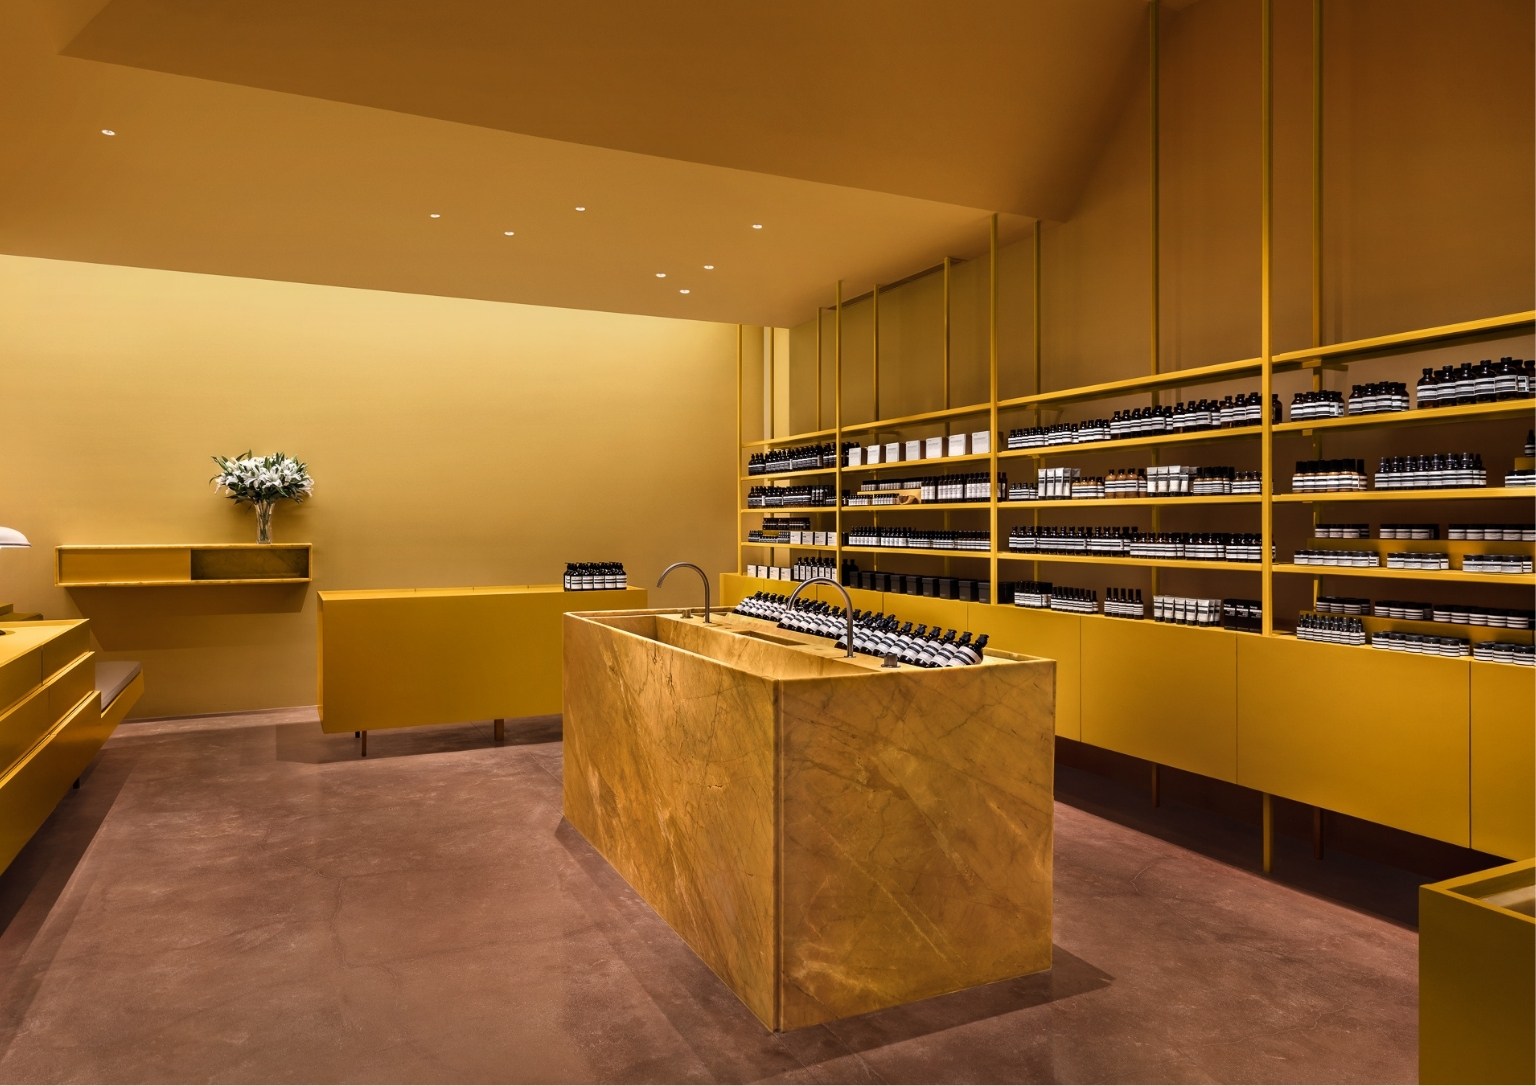 Aesop store's interior with a center marble island to showcase products.